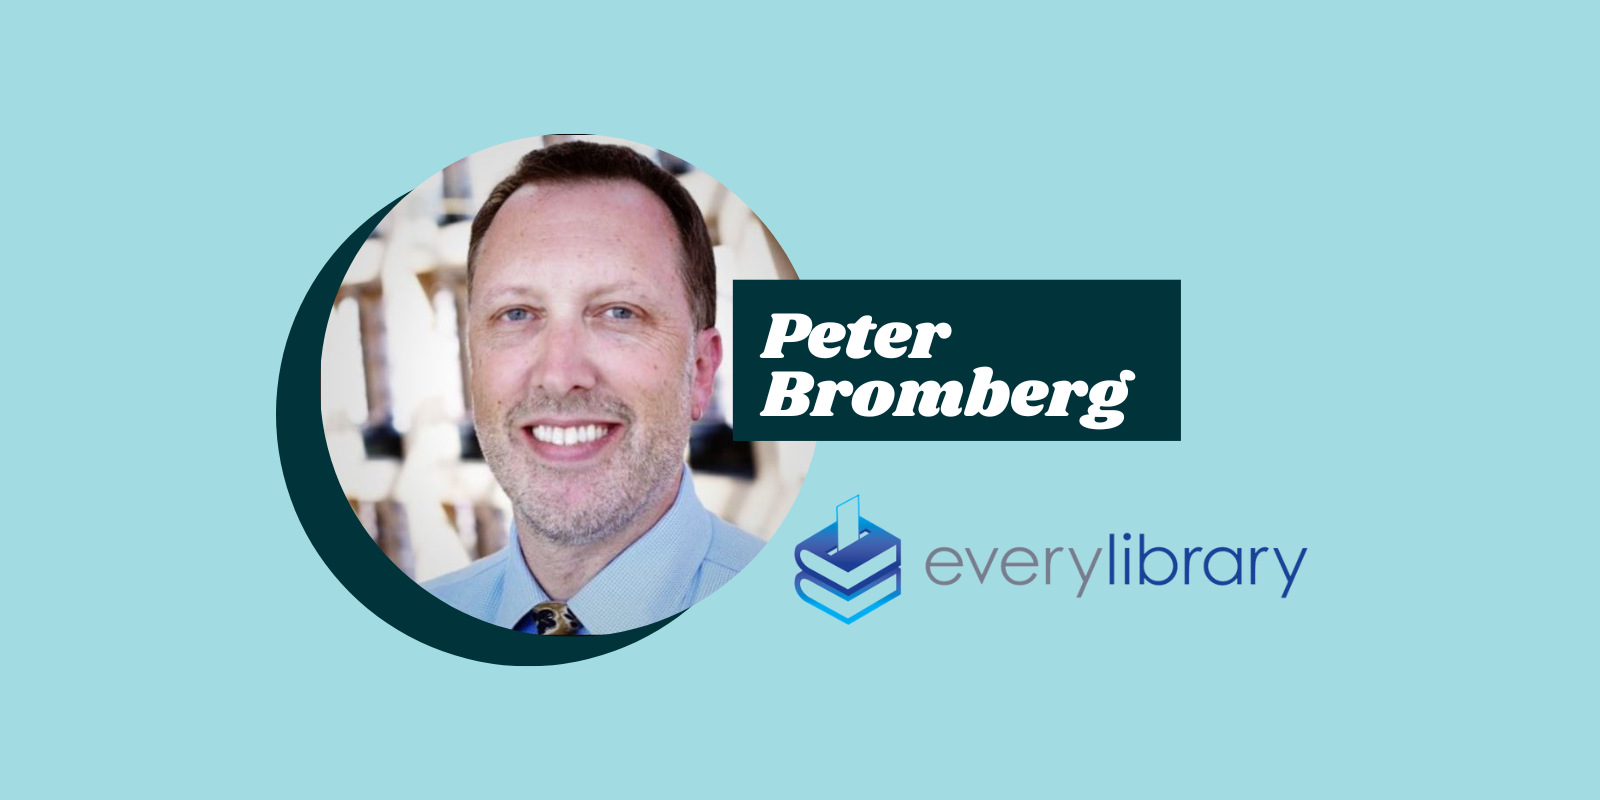 Photo of Peter Bromberg with a logo of Everylibrary.